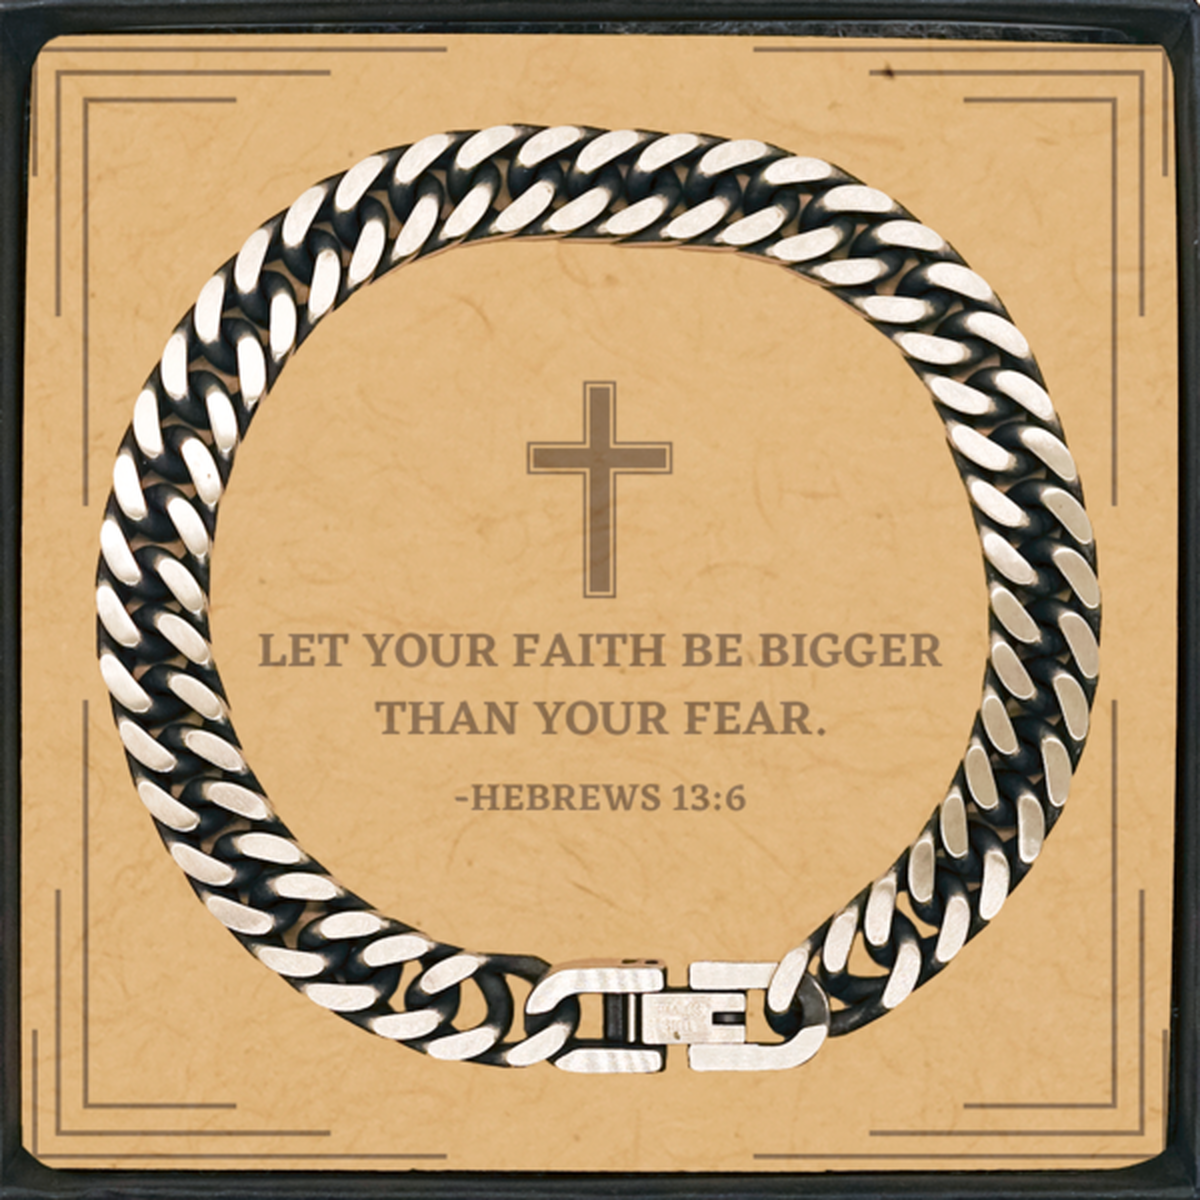 Baptism Gifts For Teenage Boys Girls, Christian Bible Verse Cuban Link Chain Bracelet, Let your faith be bigger than your fear, Confirmation Gifts, Bible Verse Card for Son, Godson, Grandson